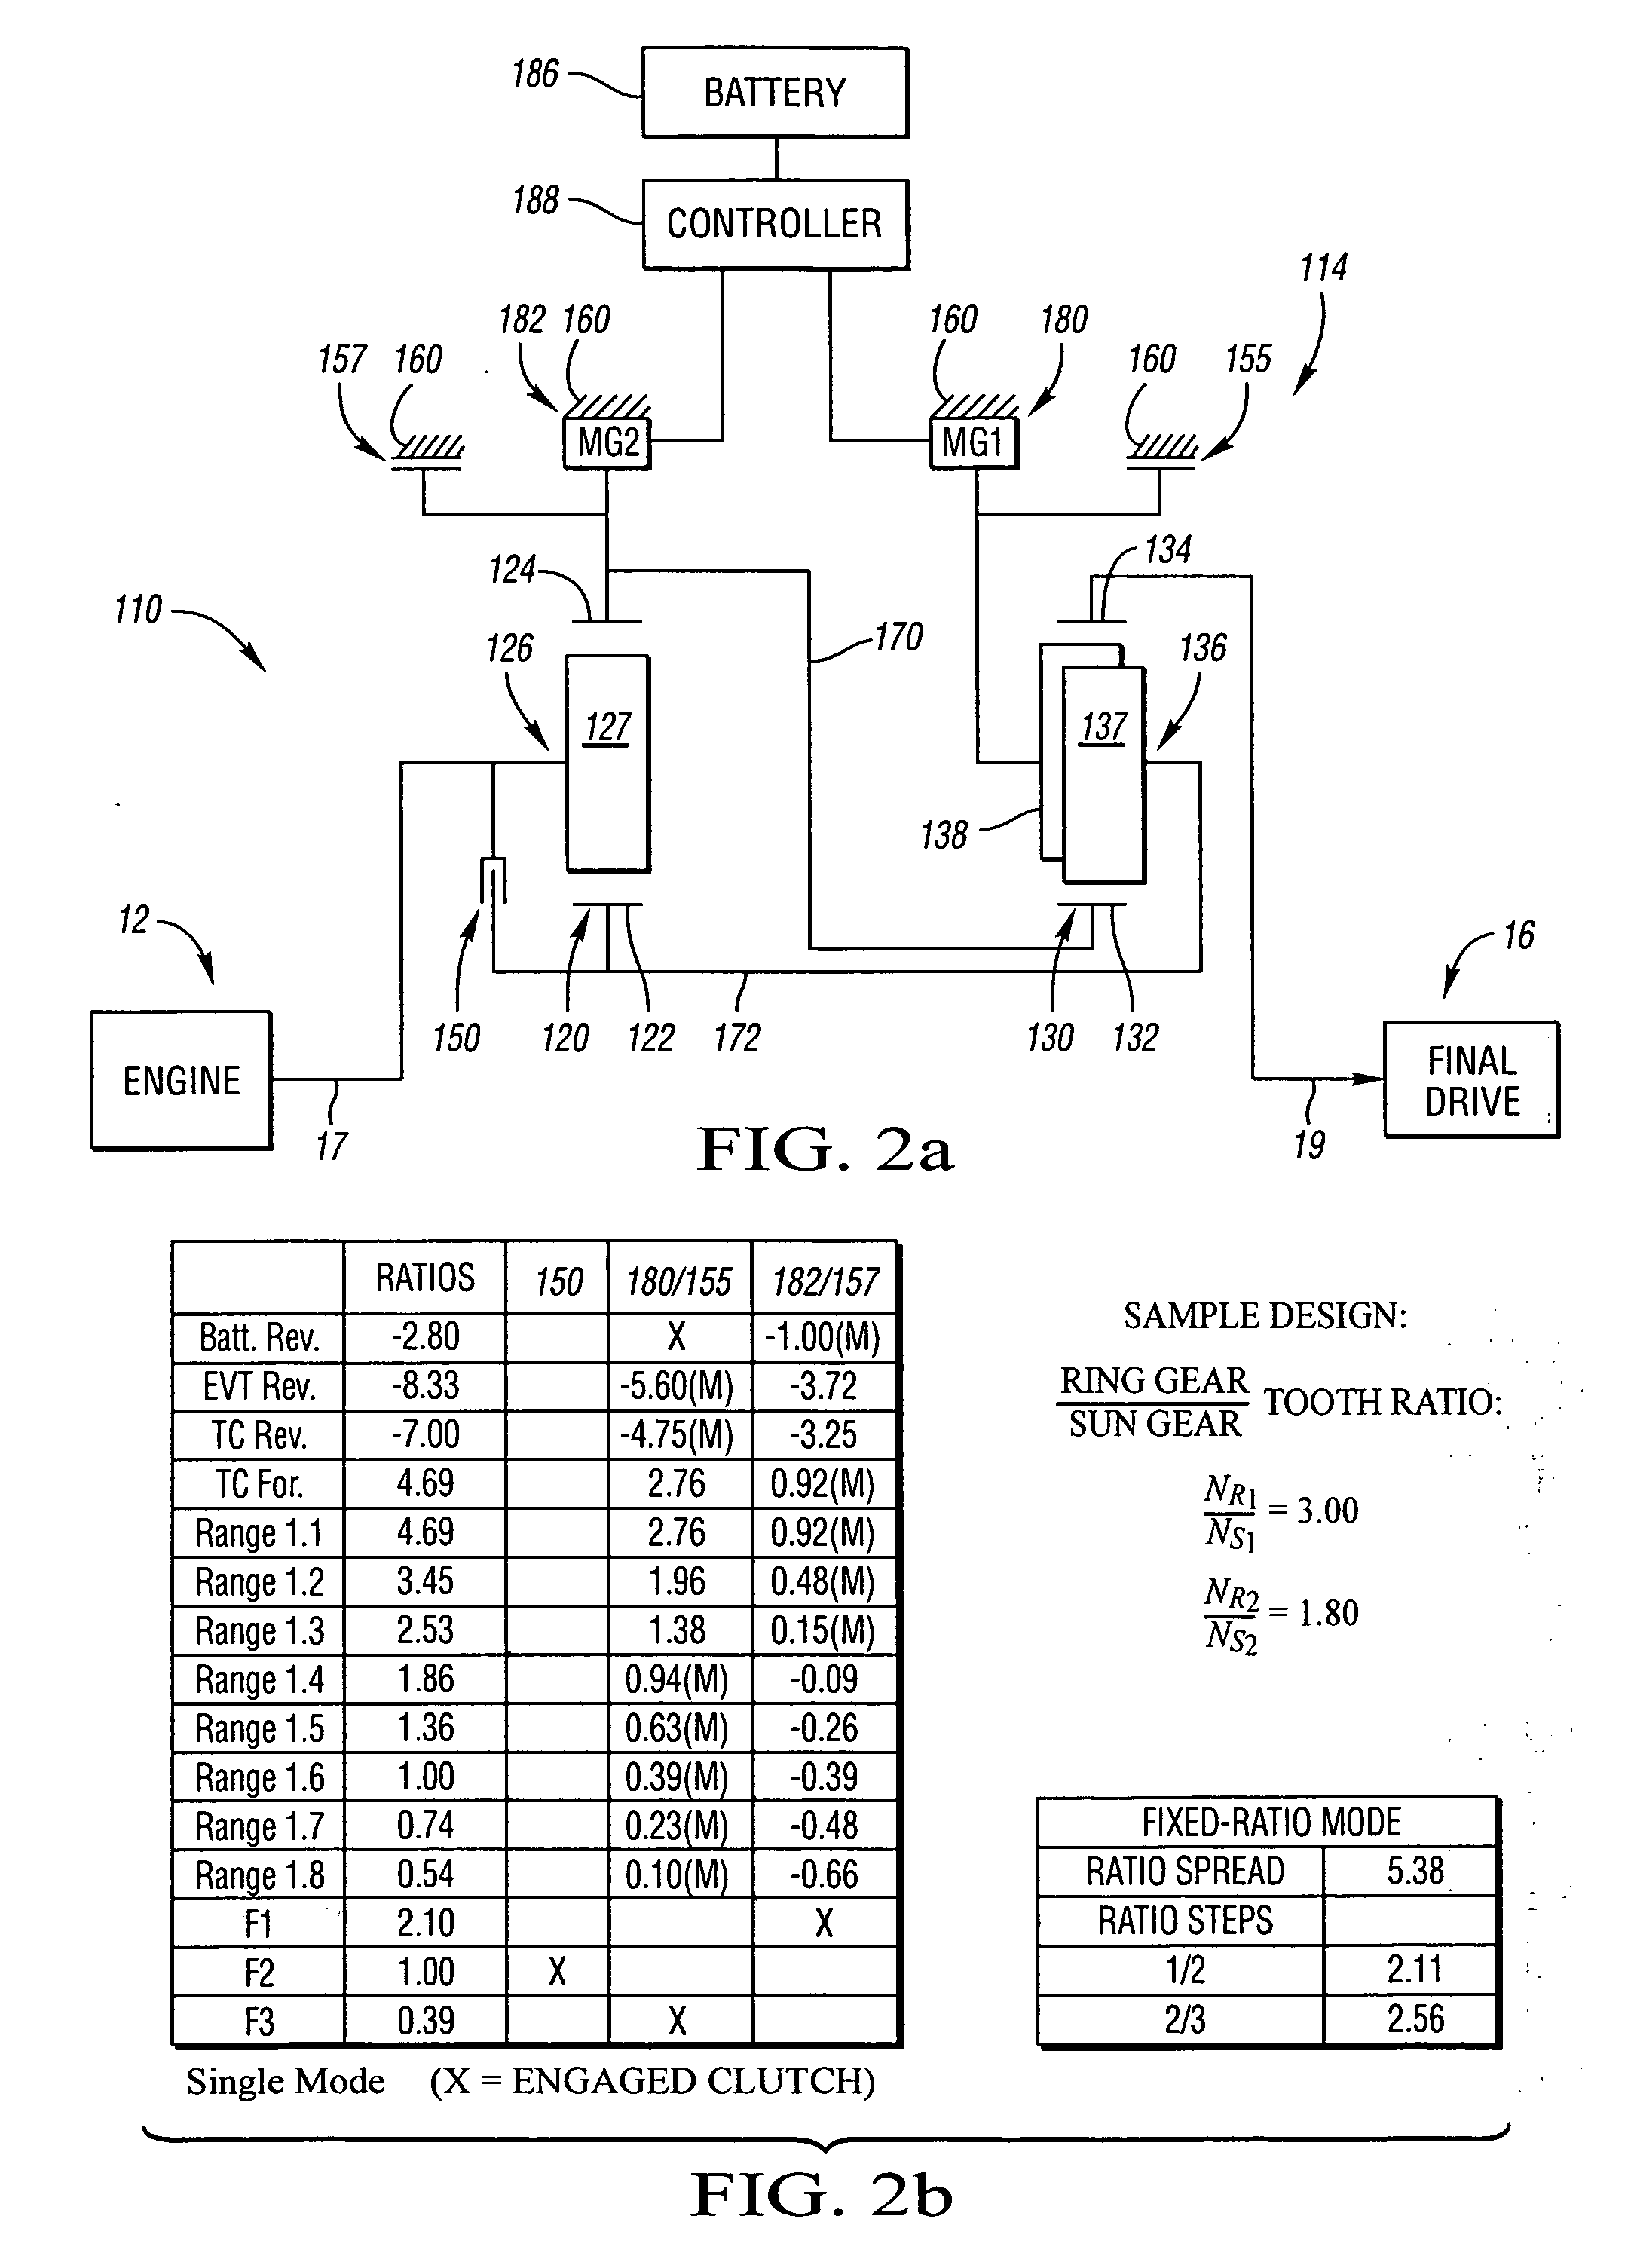 Electrically variable transmission having two planetary gear sets with two fixed interconnections